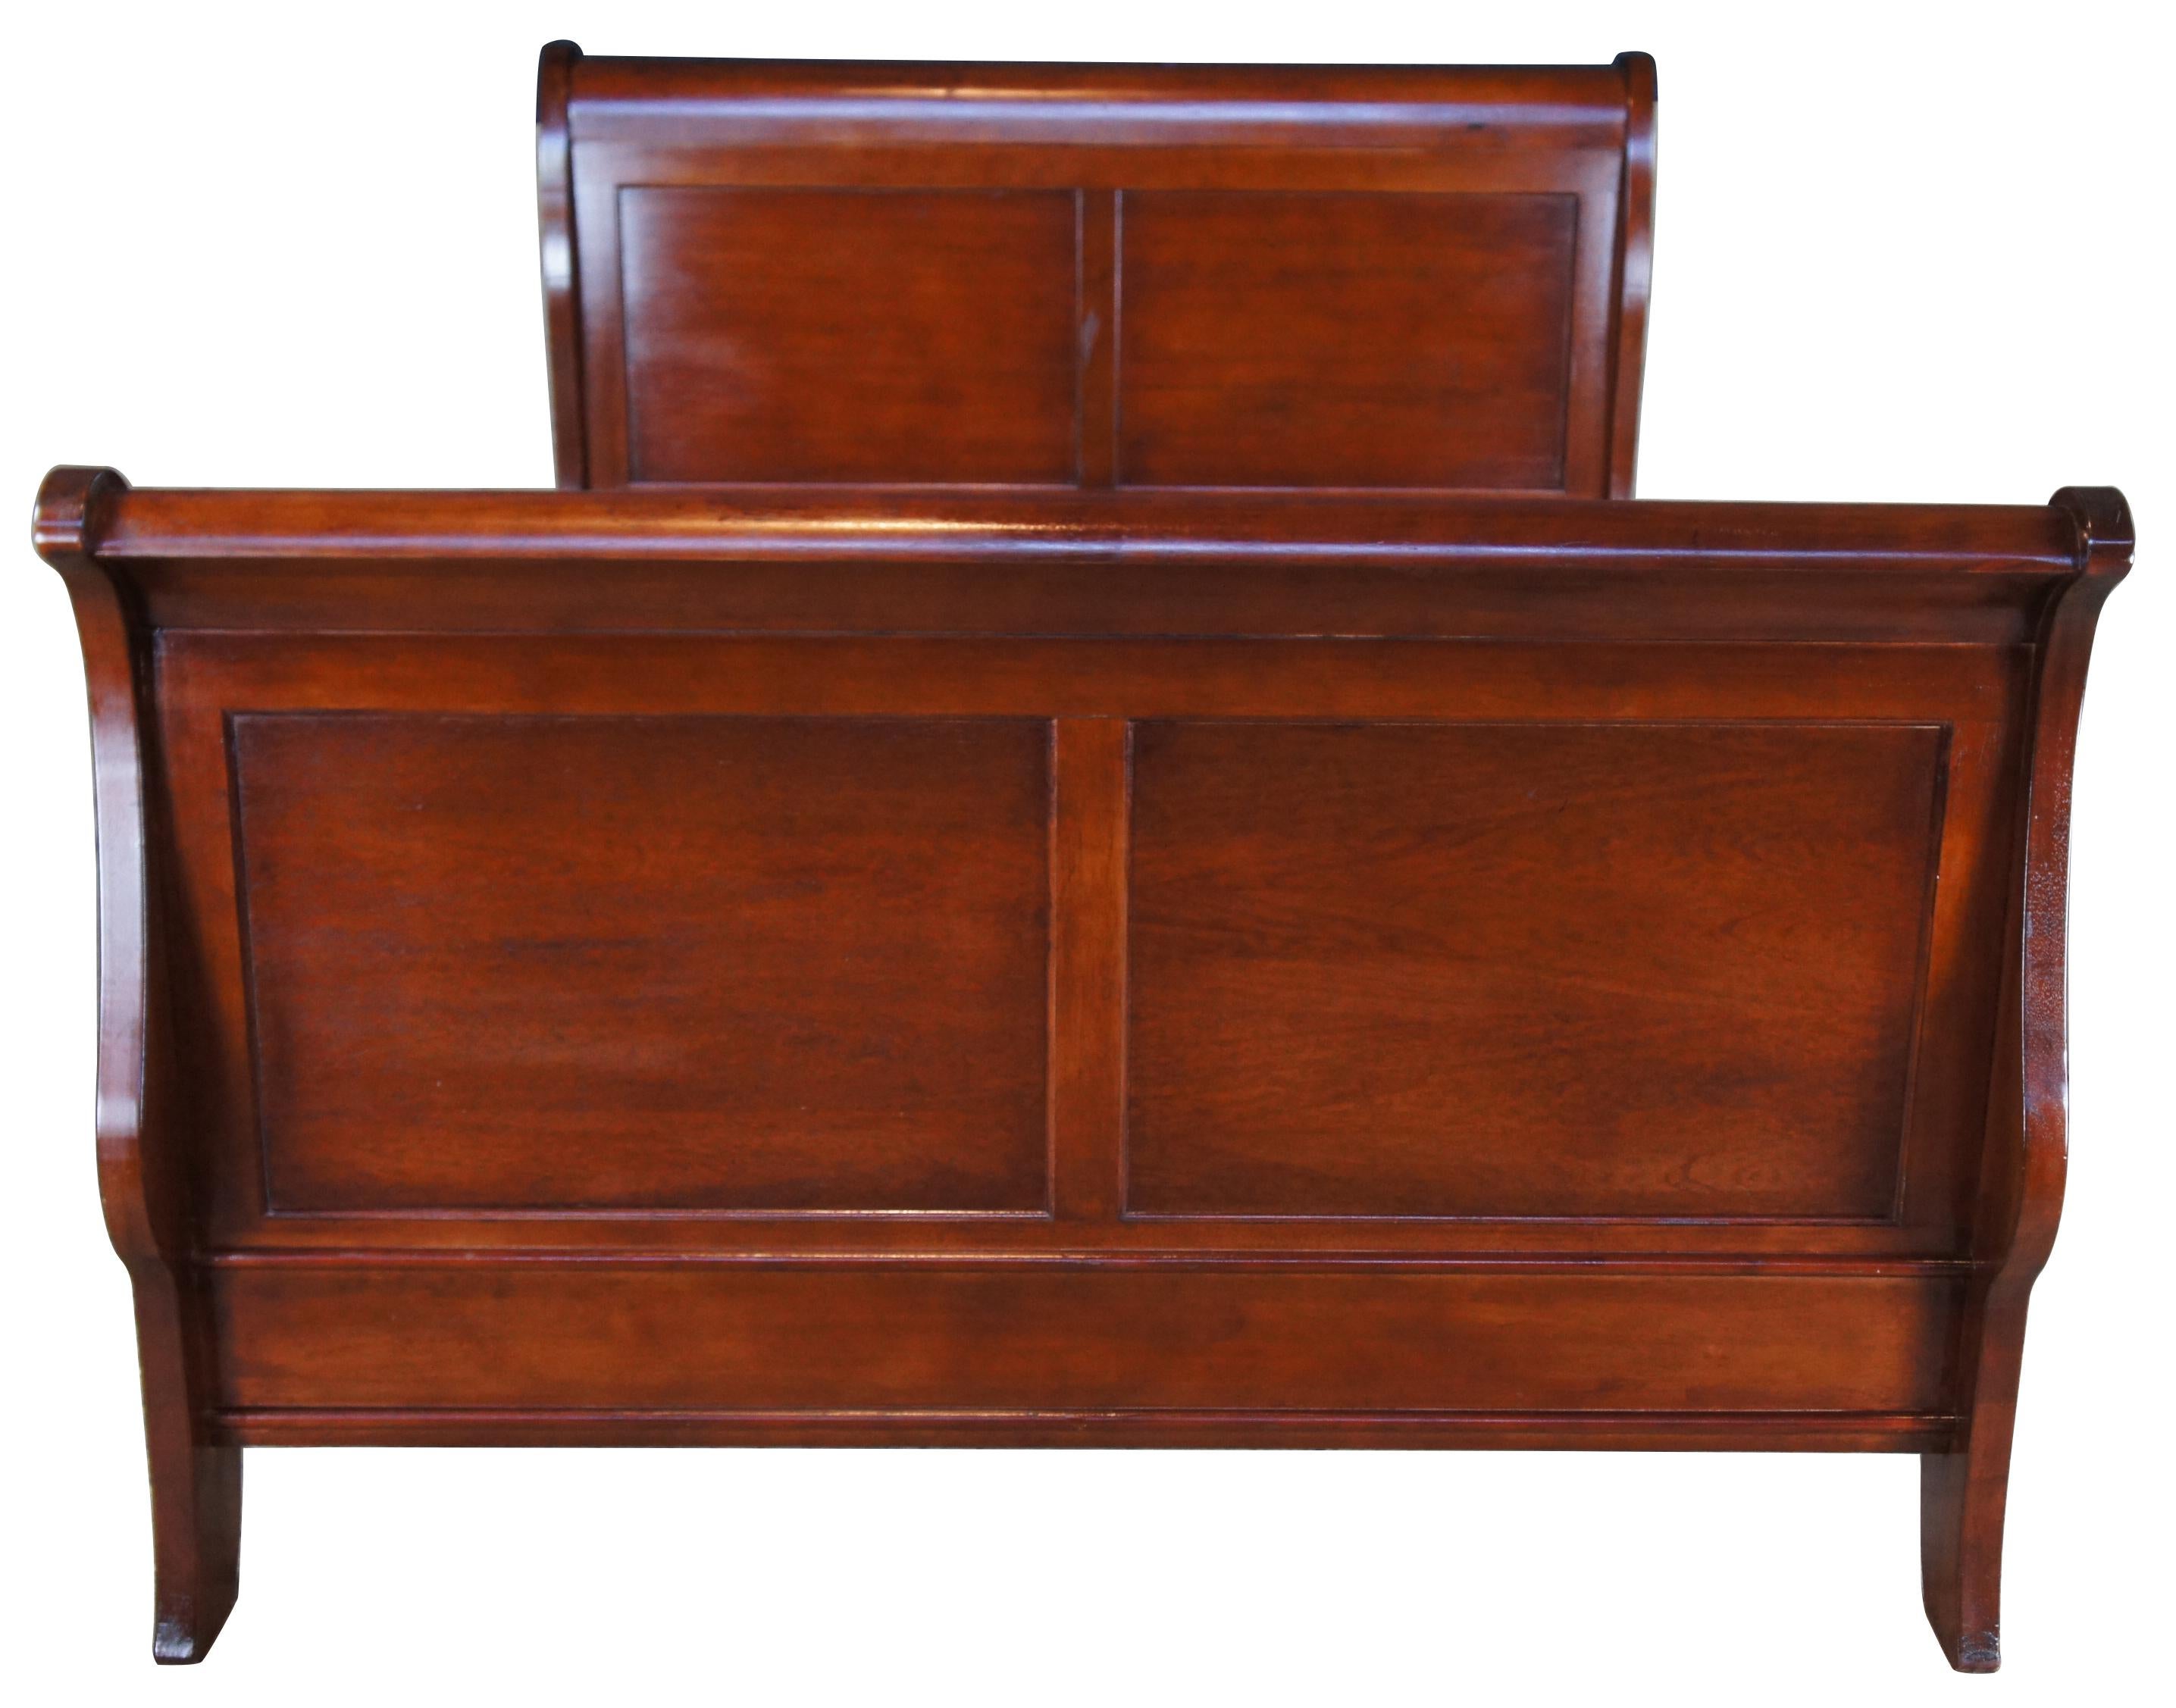 Vintage queen sized sleigh bed featuring paneled head and foot boards with serpentine shape and flared feet. Made of birch with a mahogany finish.

Measures: Foot height - 41